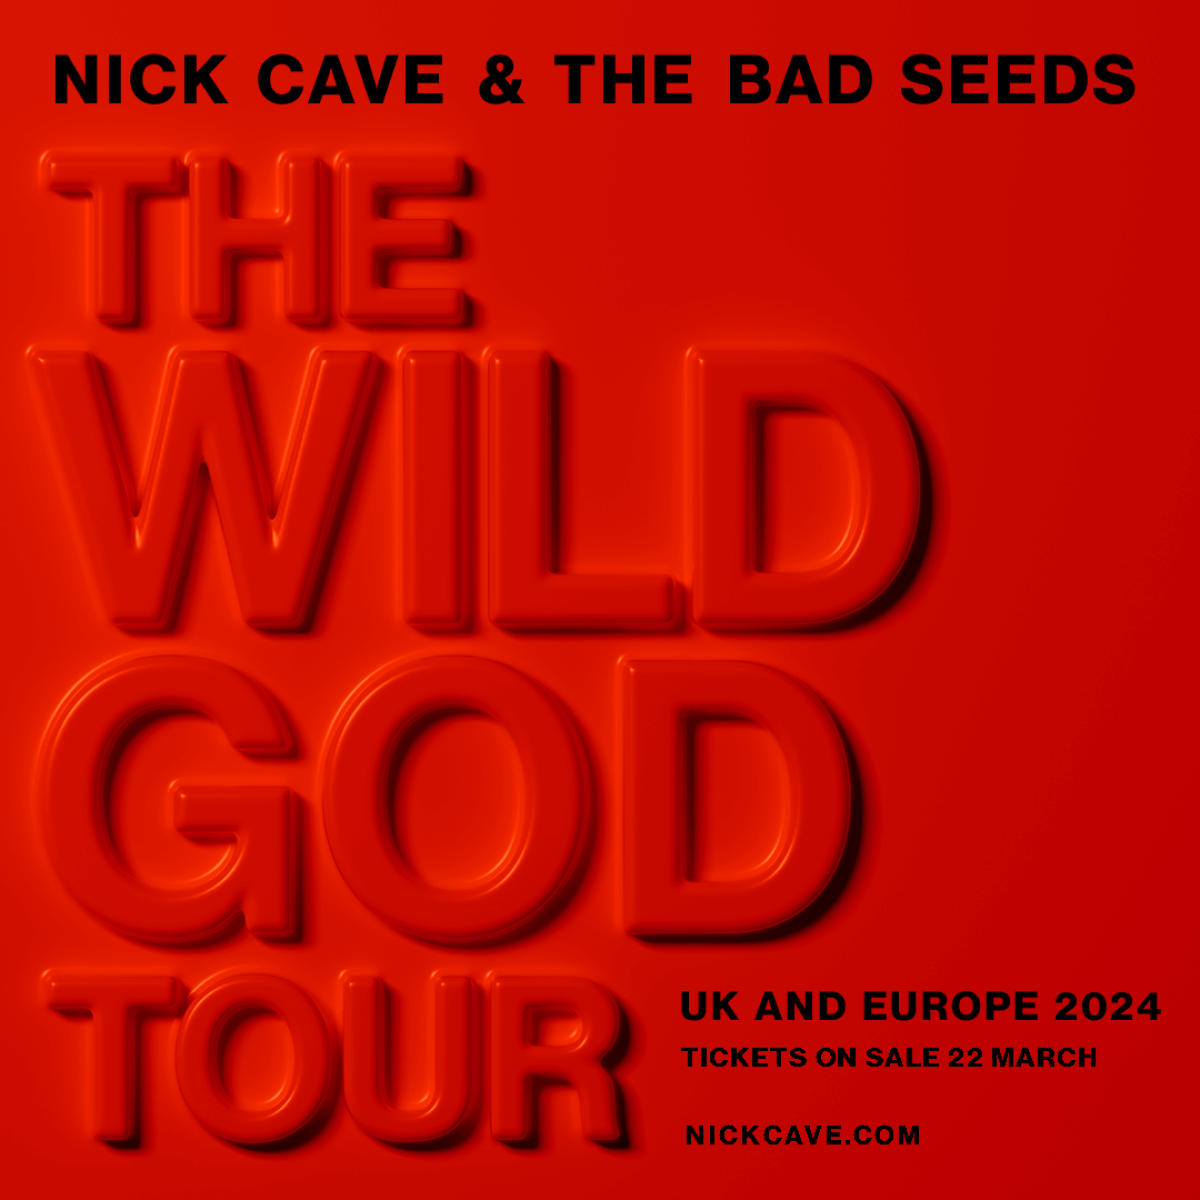 Nick Cave and the Bad Seeds - The Wild God Tour al Rudolf Weber-Arena Tickets